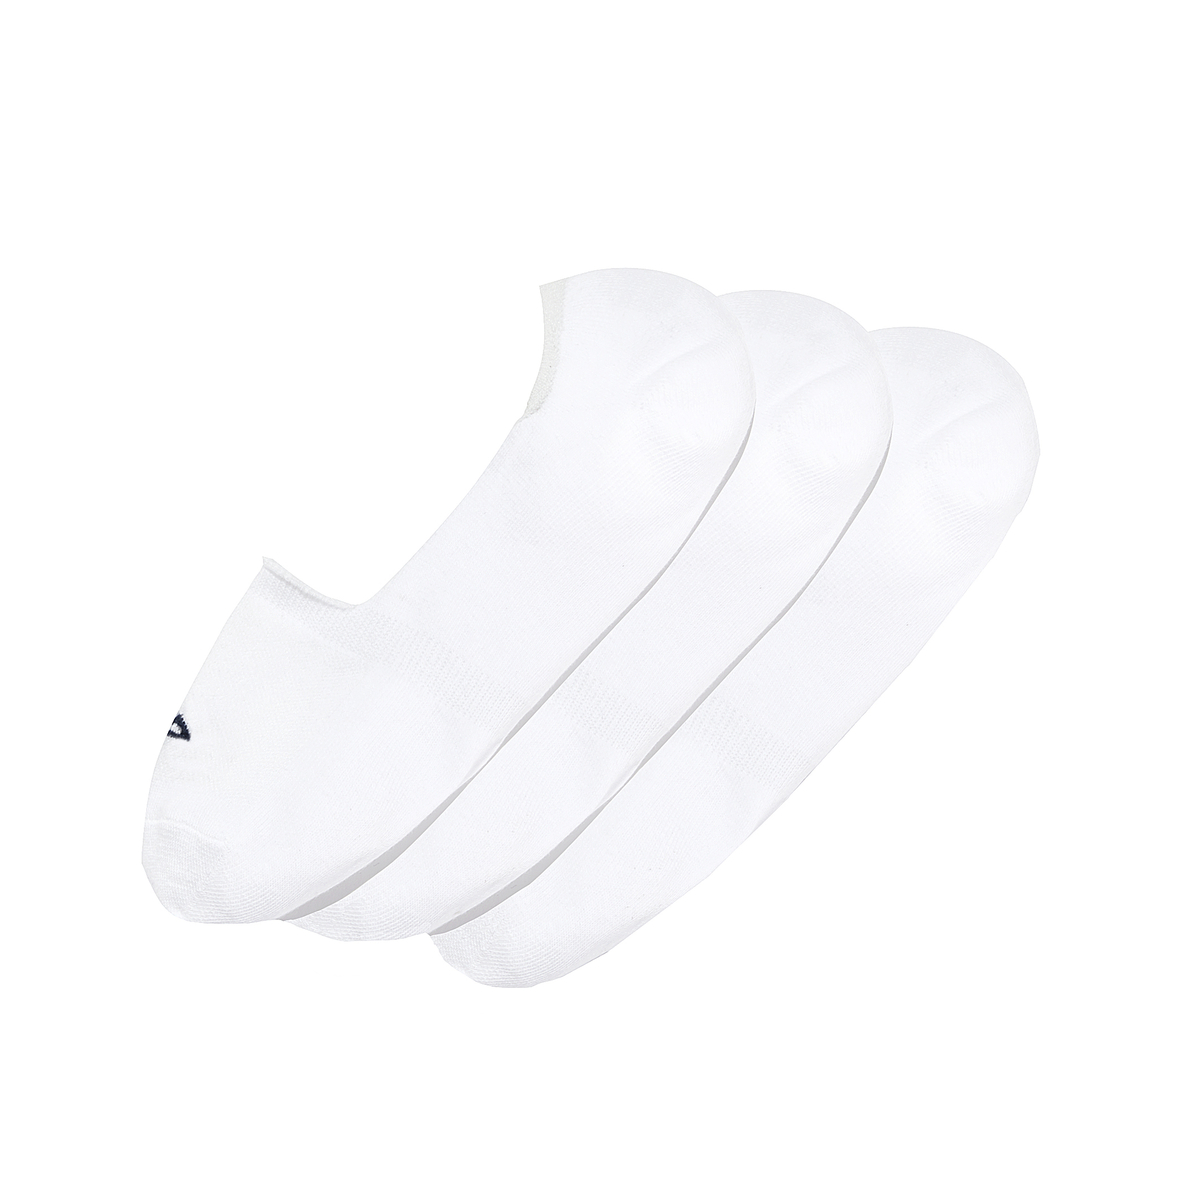 Pack of 3 Pairs of Cotton Mix Trainer Socks